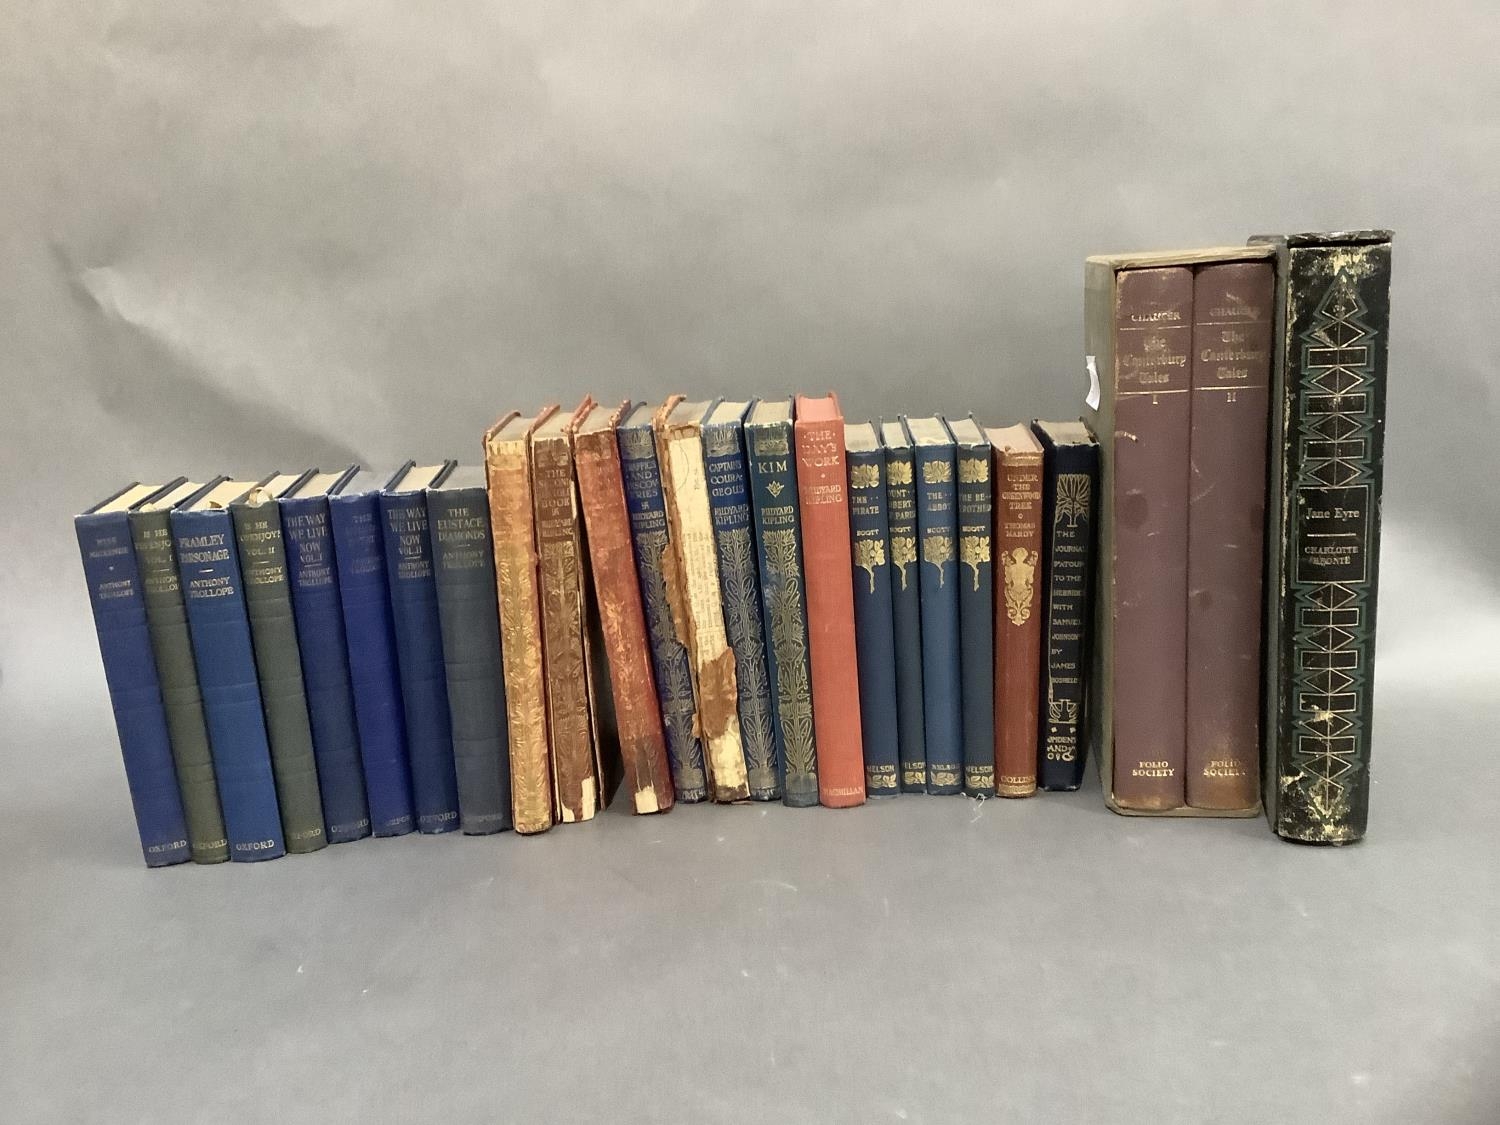 Jane Eyre and The Canterbury Tales in slip cases and a small quantity of uniform bound books